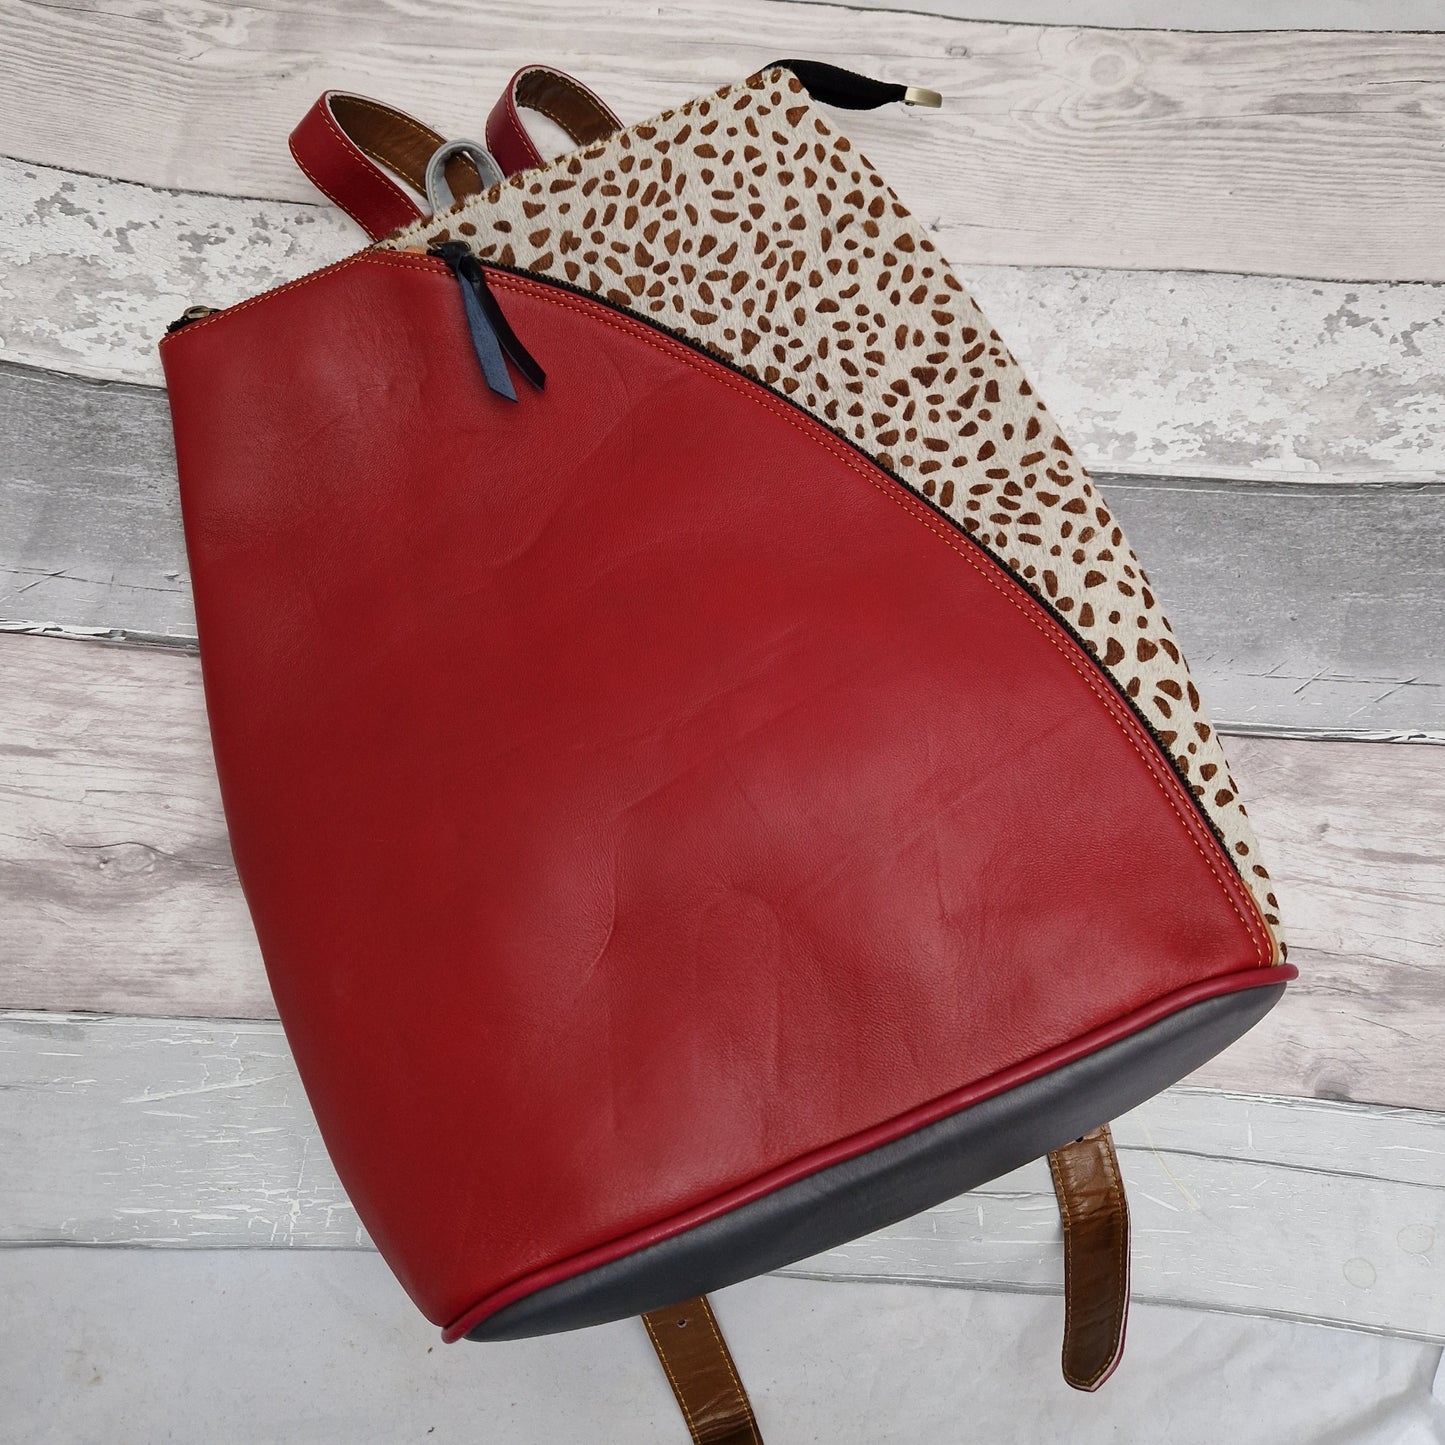 Red leather backback with white cow hide panel decorated in brown spots.